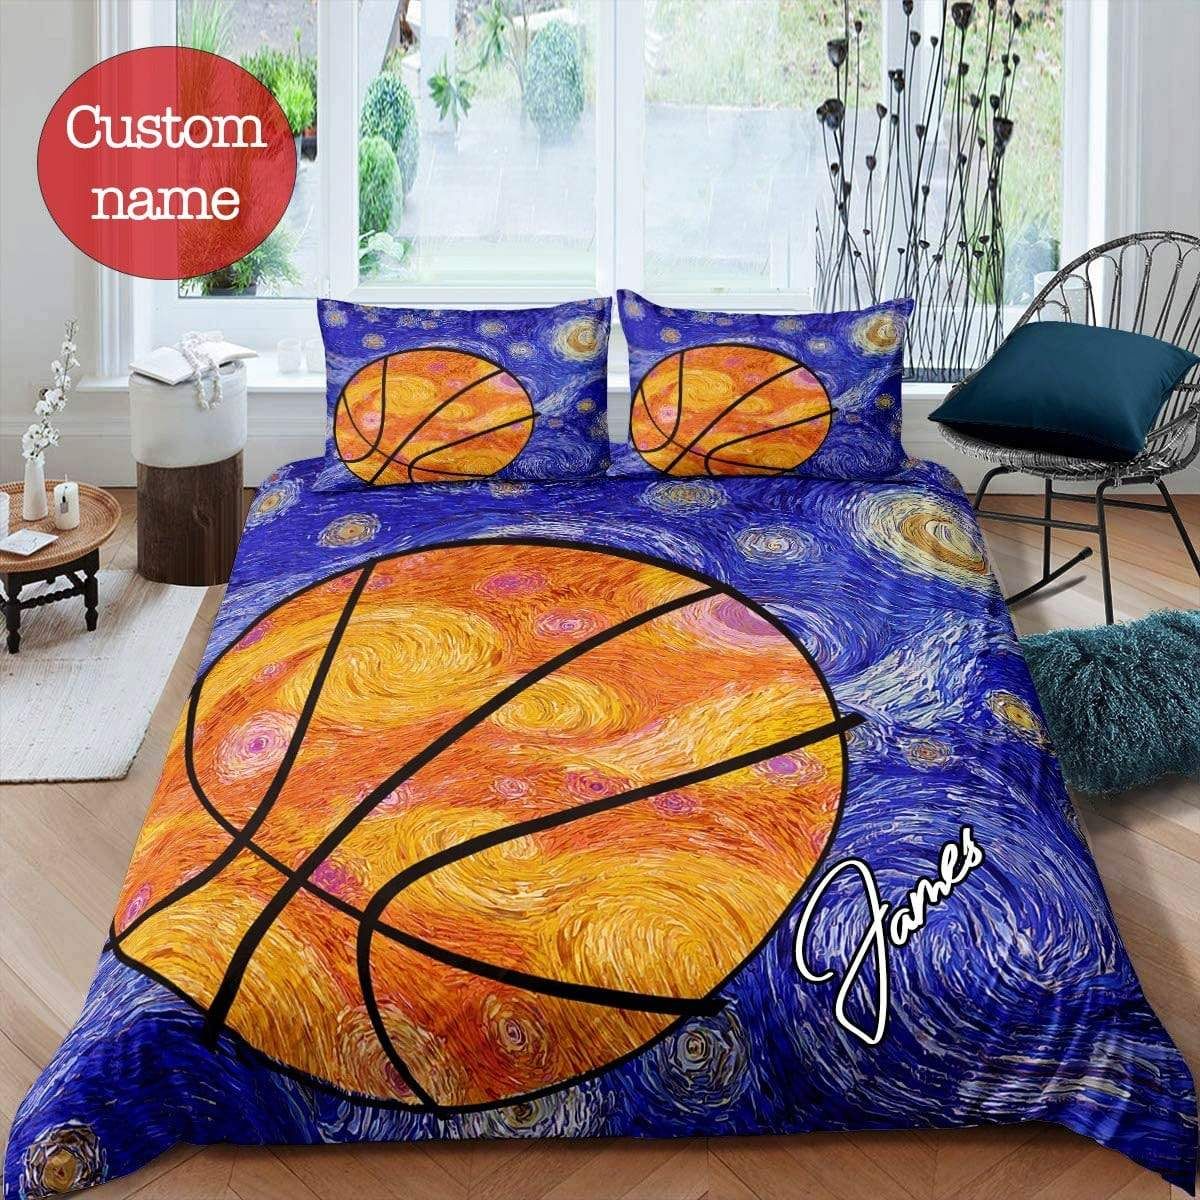 Personalized Basketball Van Gogh Bedding Set With Your Name